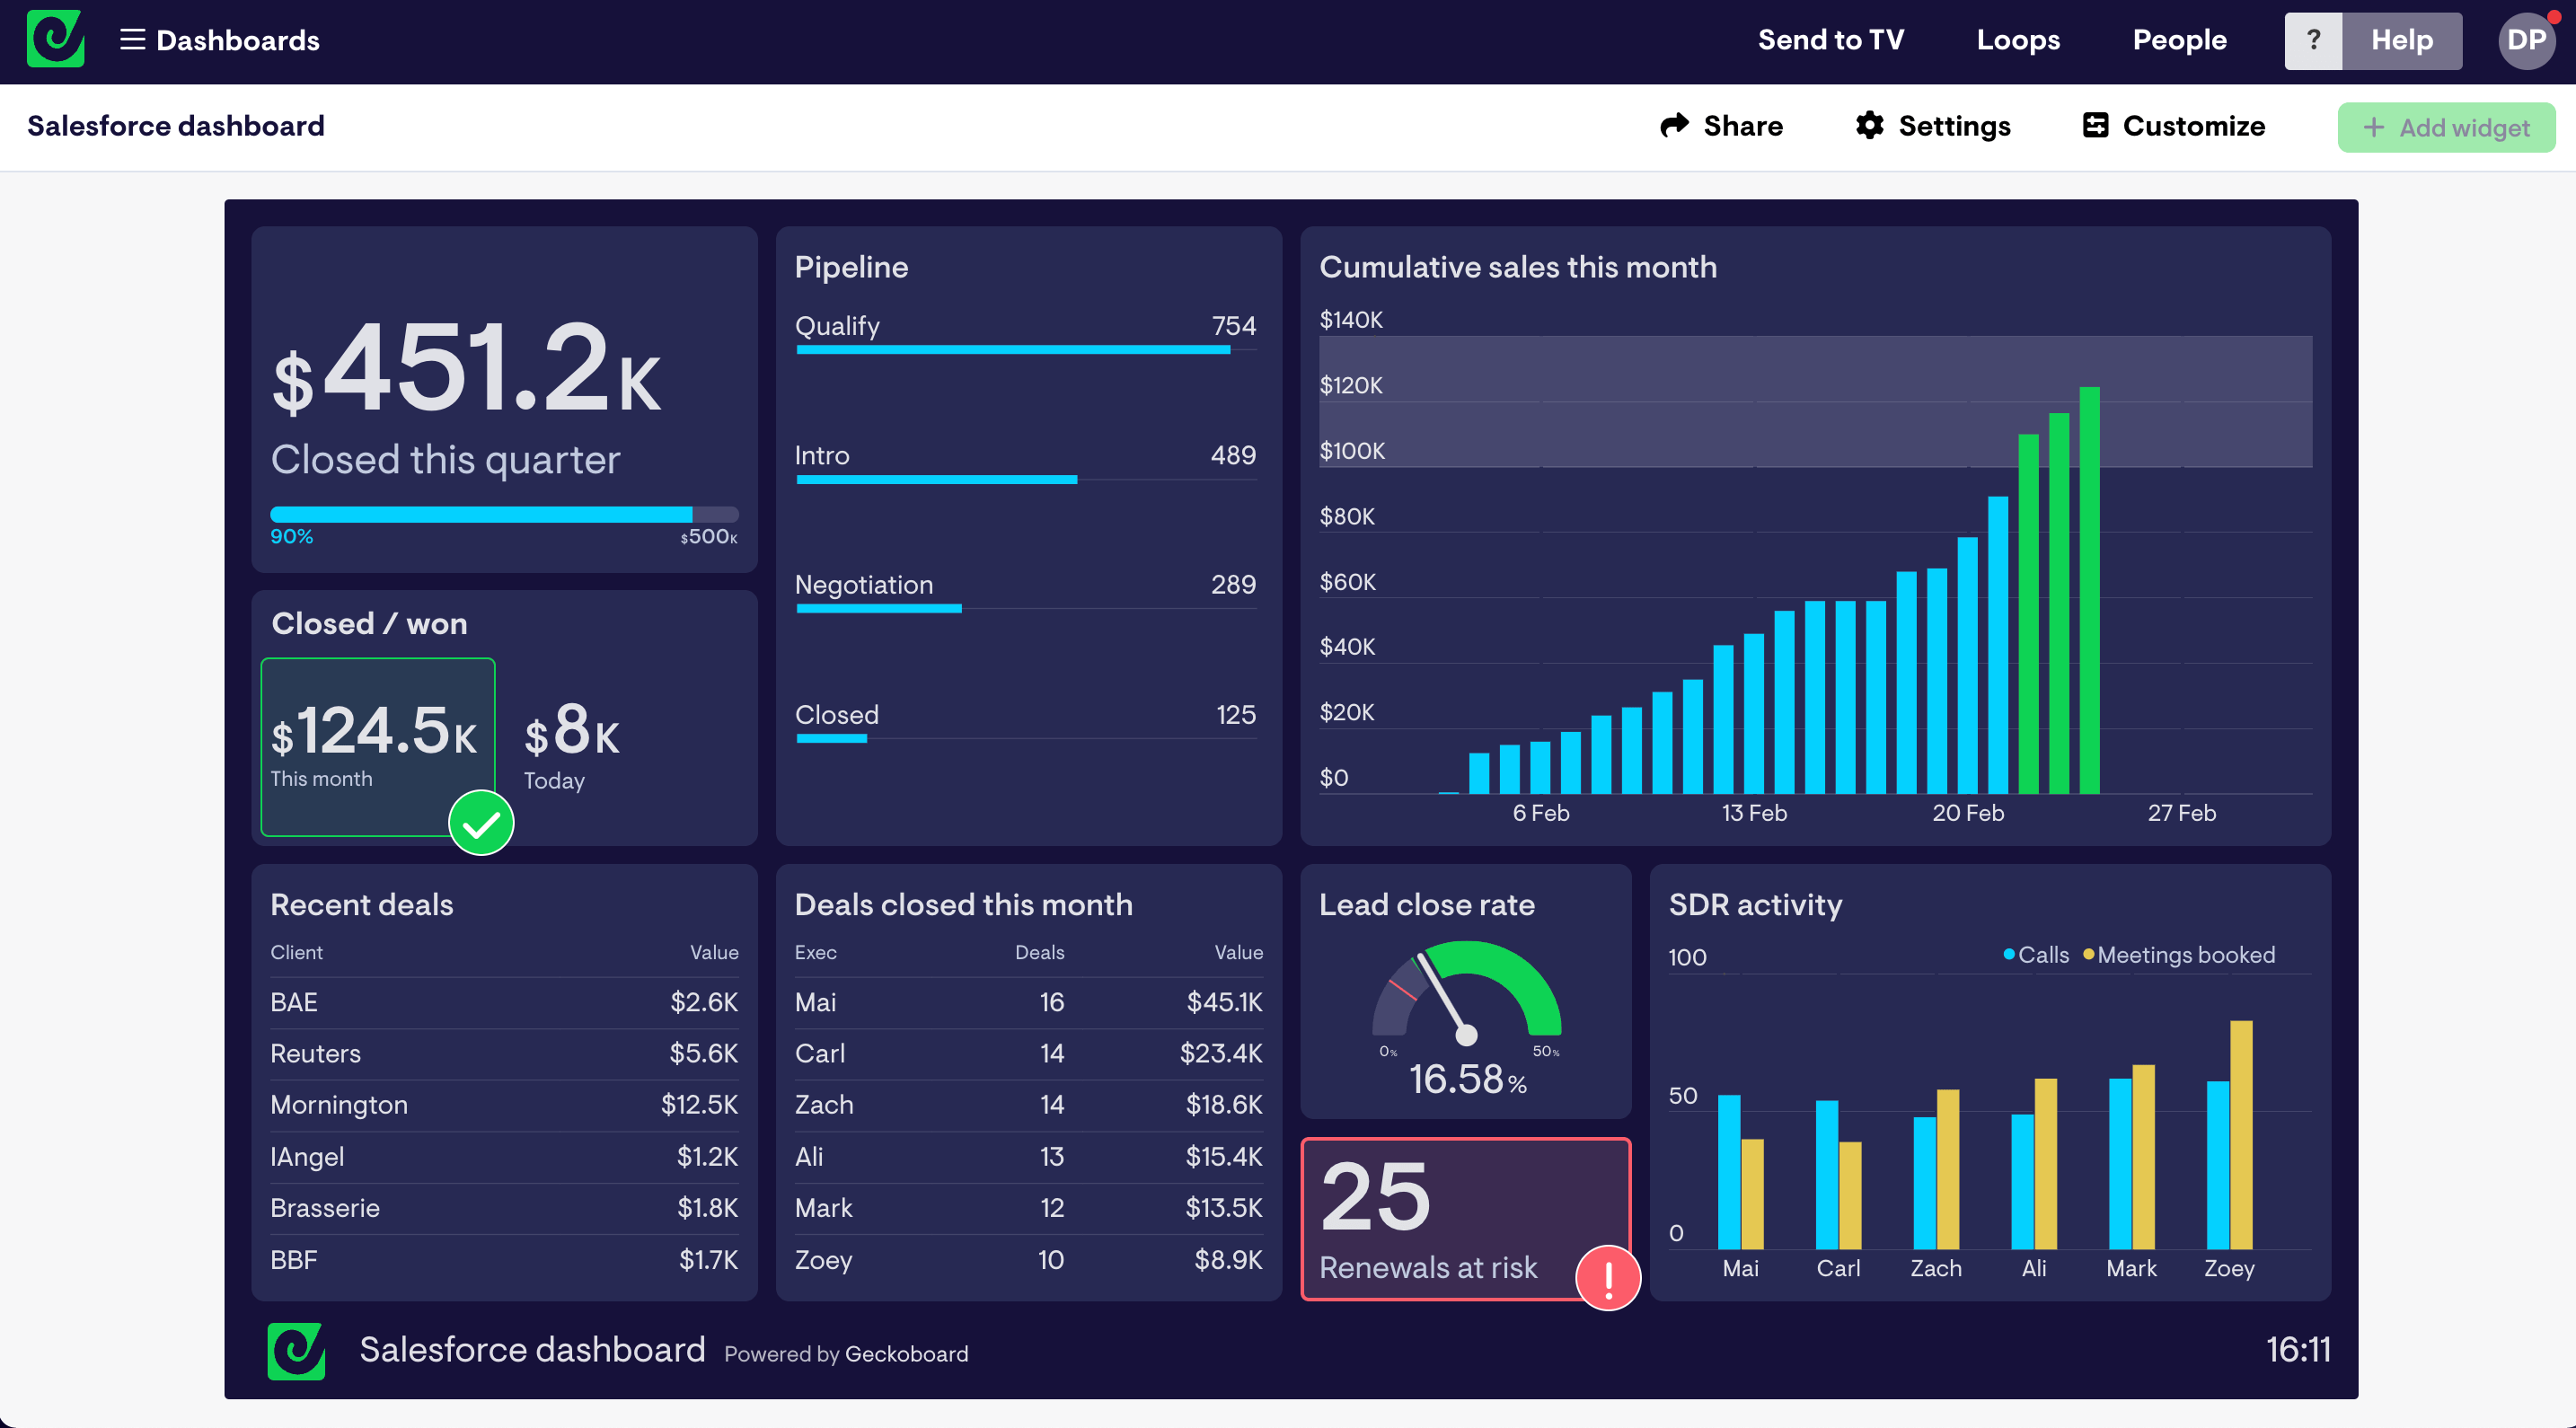 Example of a completed Salesforce dashboard in the Geckoboard app.